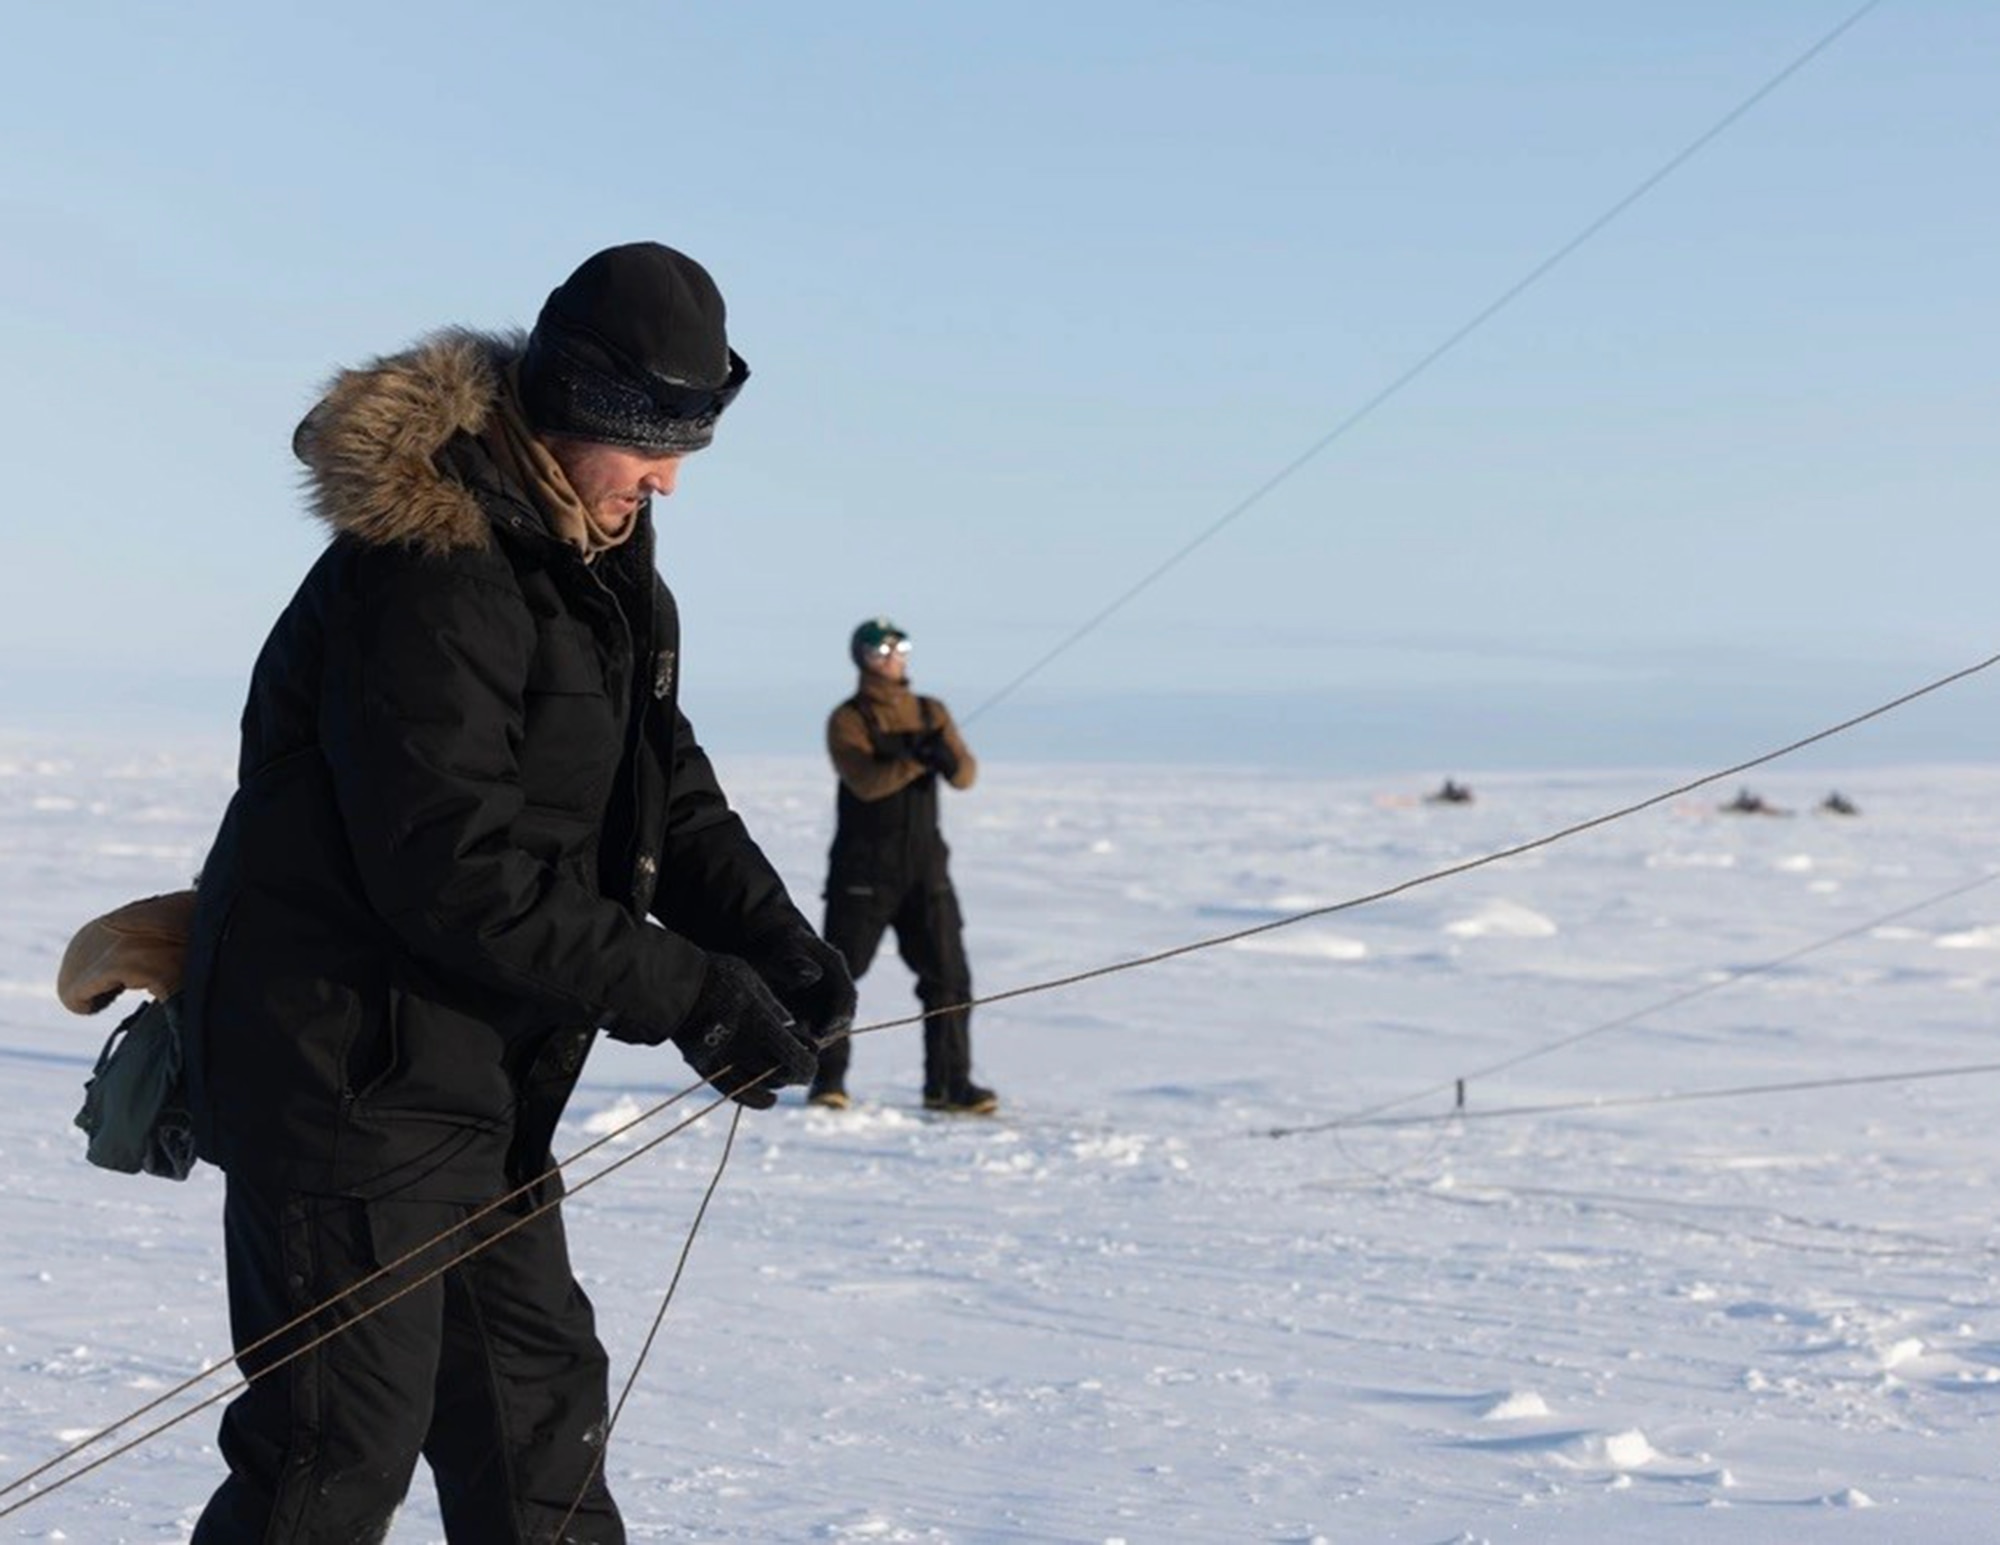 U.S. Air Force Master Sgt. Brian Shuey and Cody Hallas, 133rd Contingency Response Flight, set up a 50-foot CSA “Carrymast” CTM15 Comm mast with UHF and VHF antennas in Resolute Bay, Nunavut, Canada, March 10, 2023.